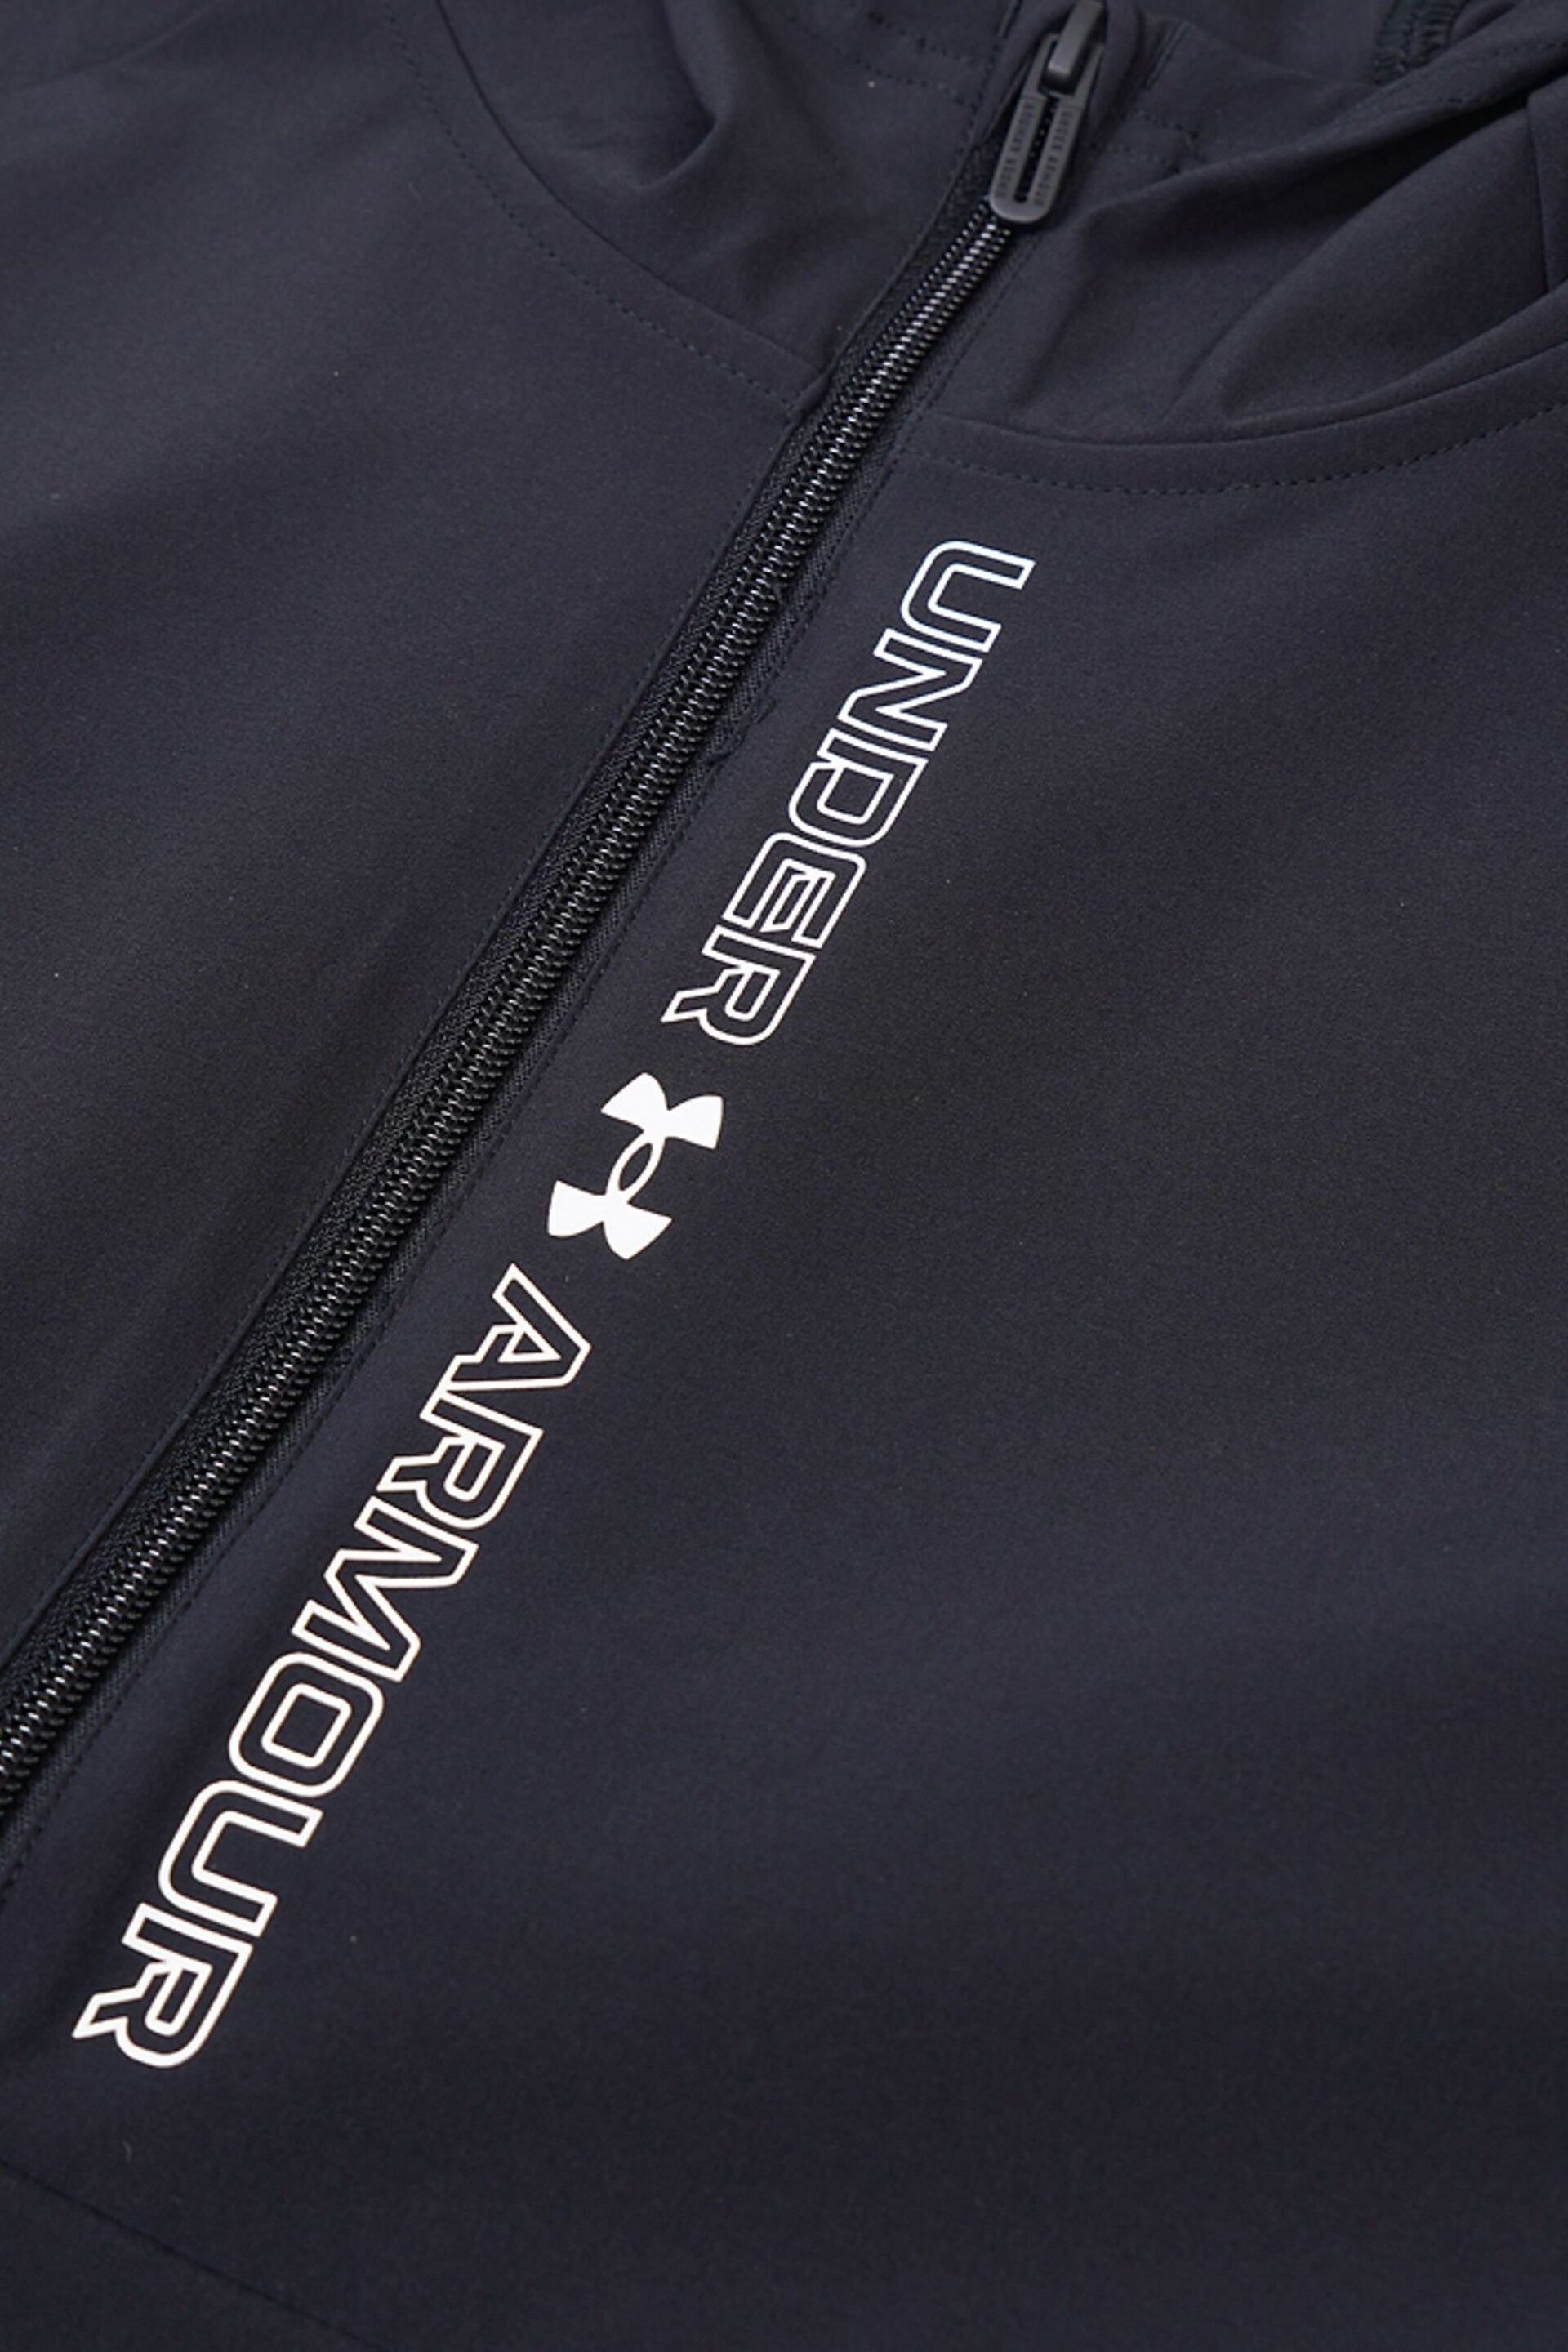 Under Armour Outrun The Storm Black Jacket - Image 15 of 19